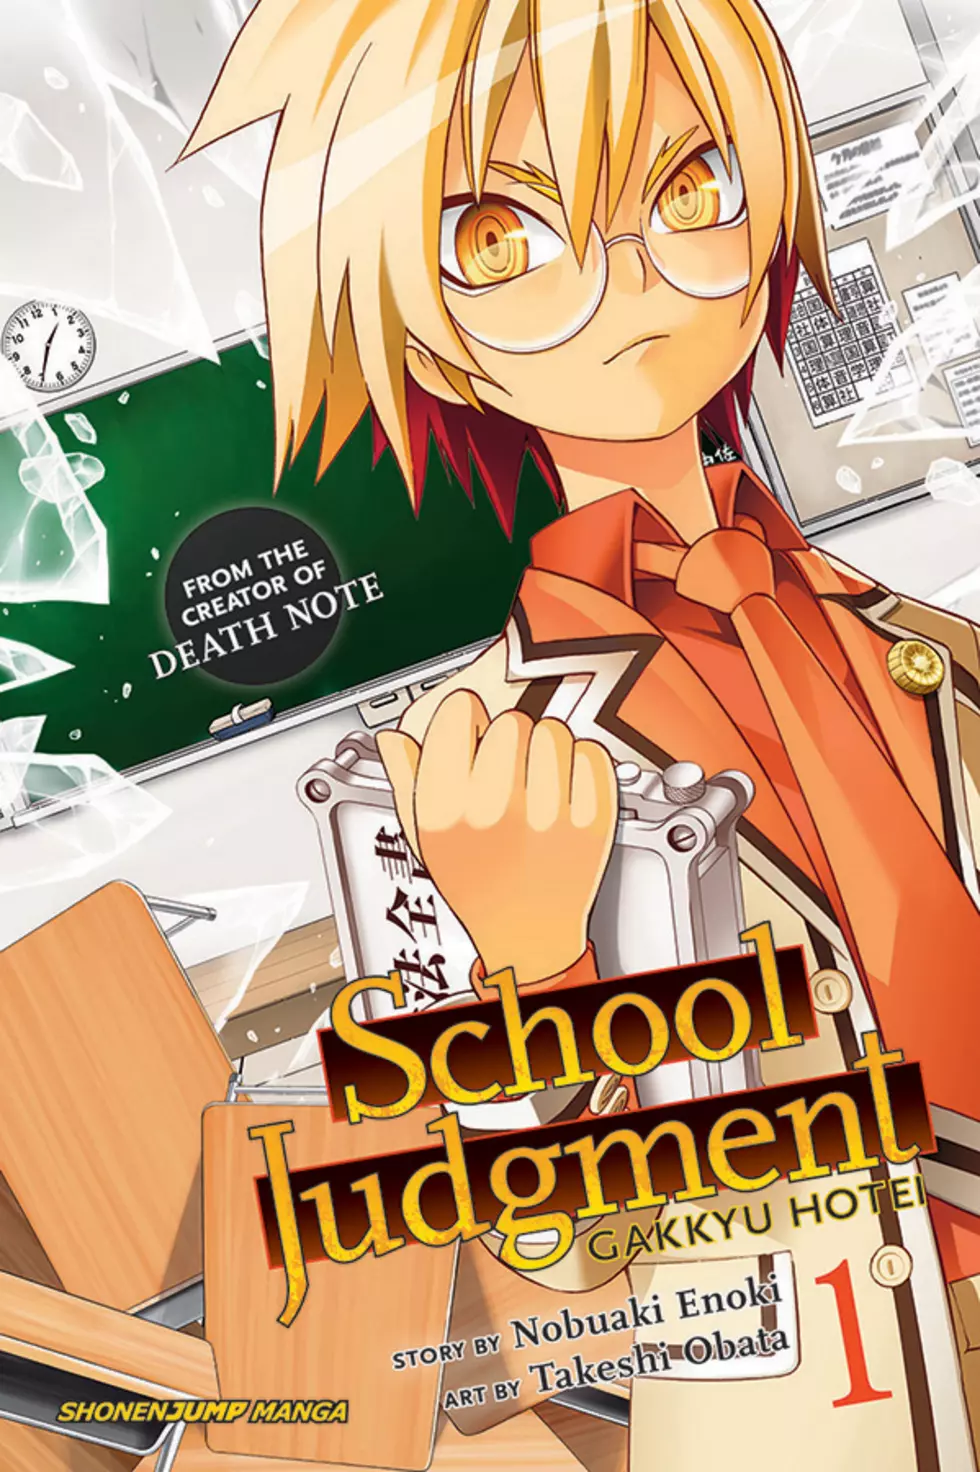 No Objection: Obata and Enoki&#8217;s &#8216;School Judgment&#8217; Launching in February